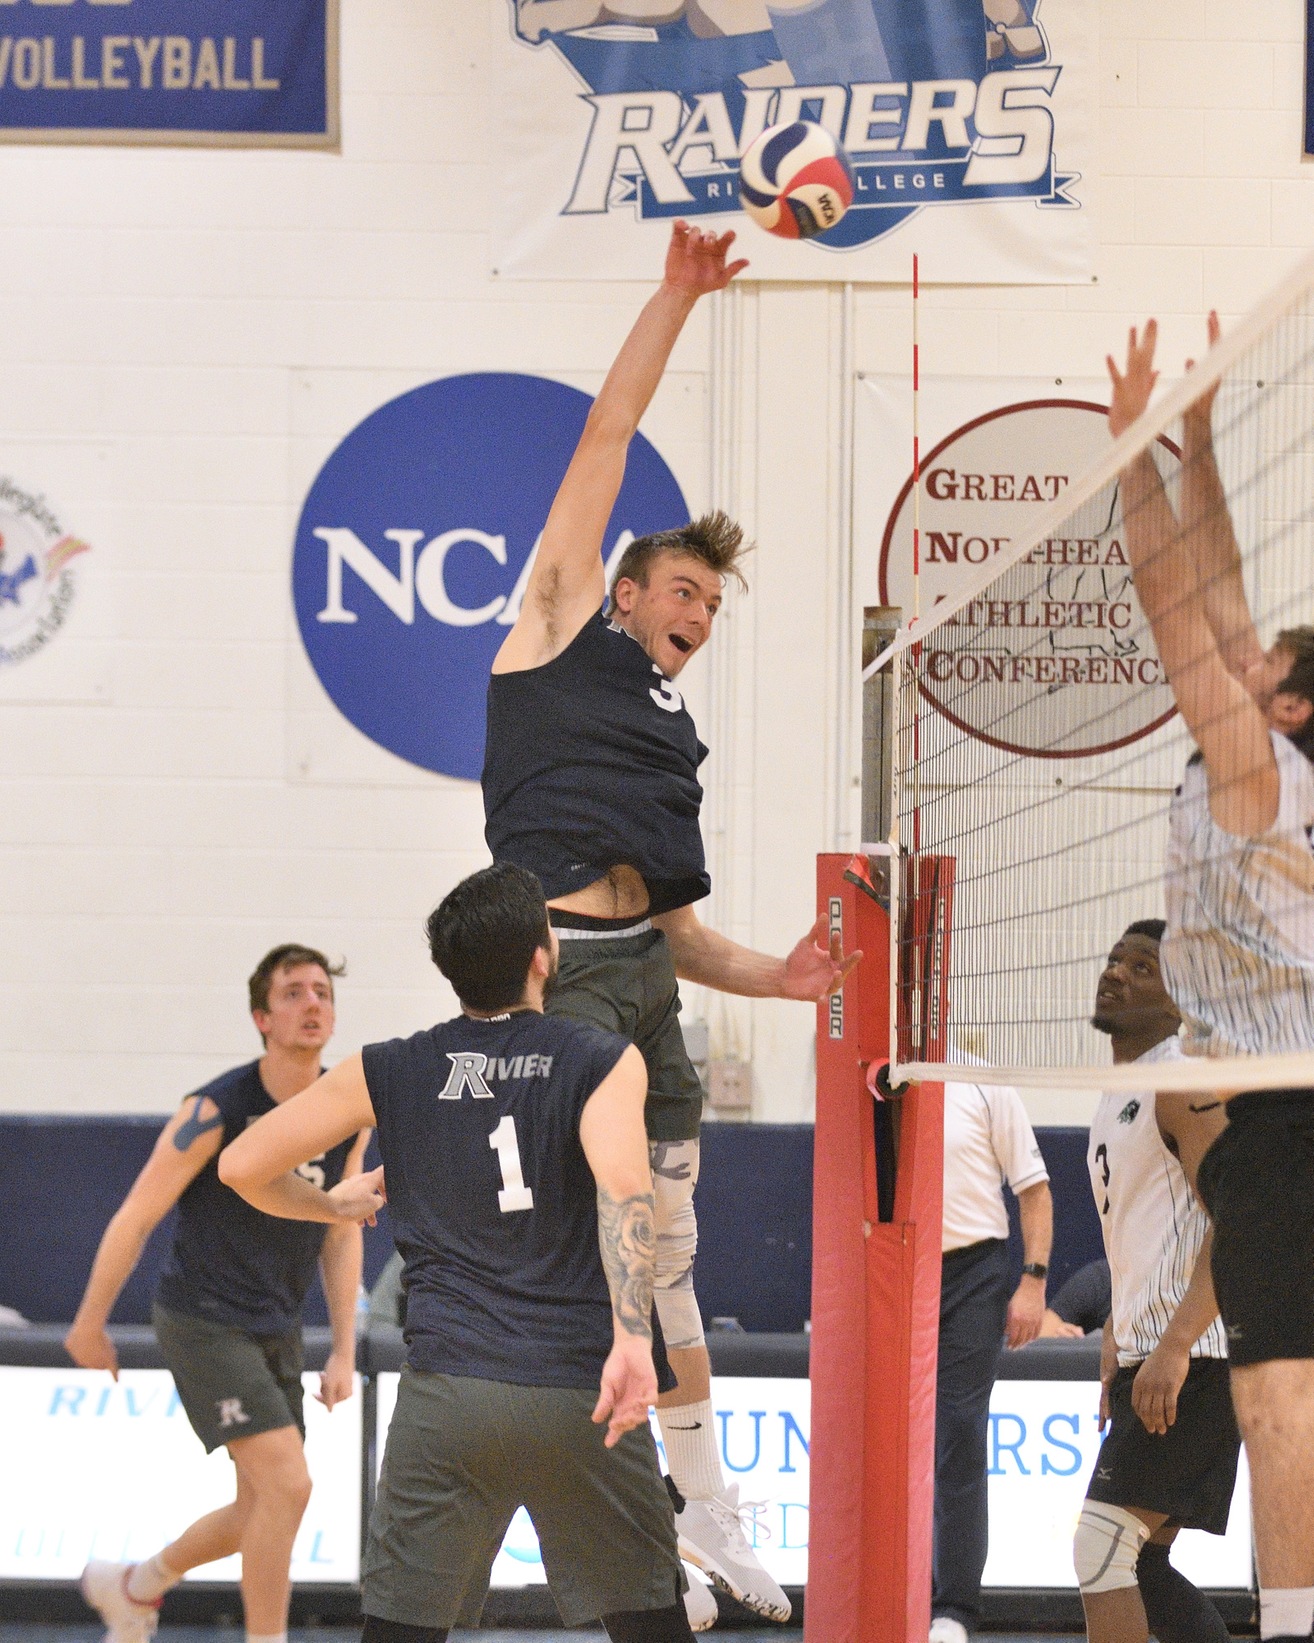 Men's Volleyball: Raiders fall to No. 1 Springfield College, 3-1.